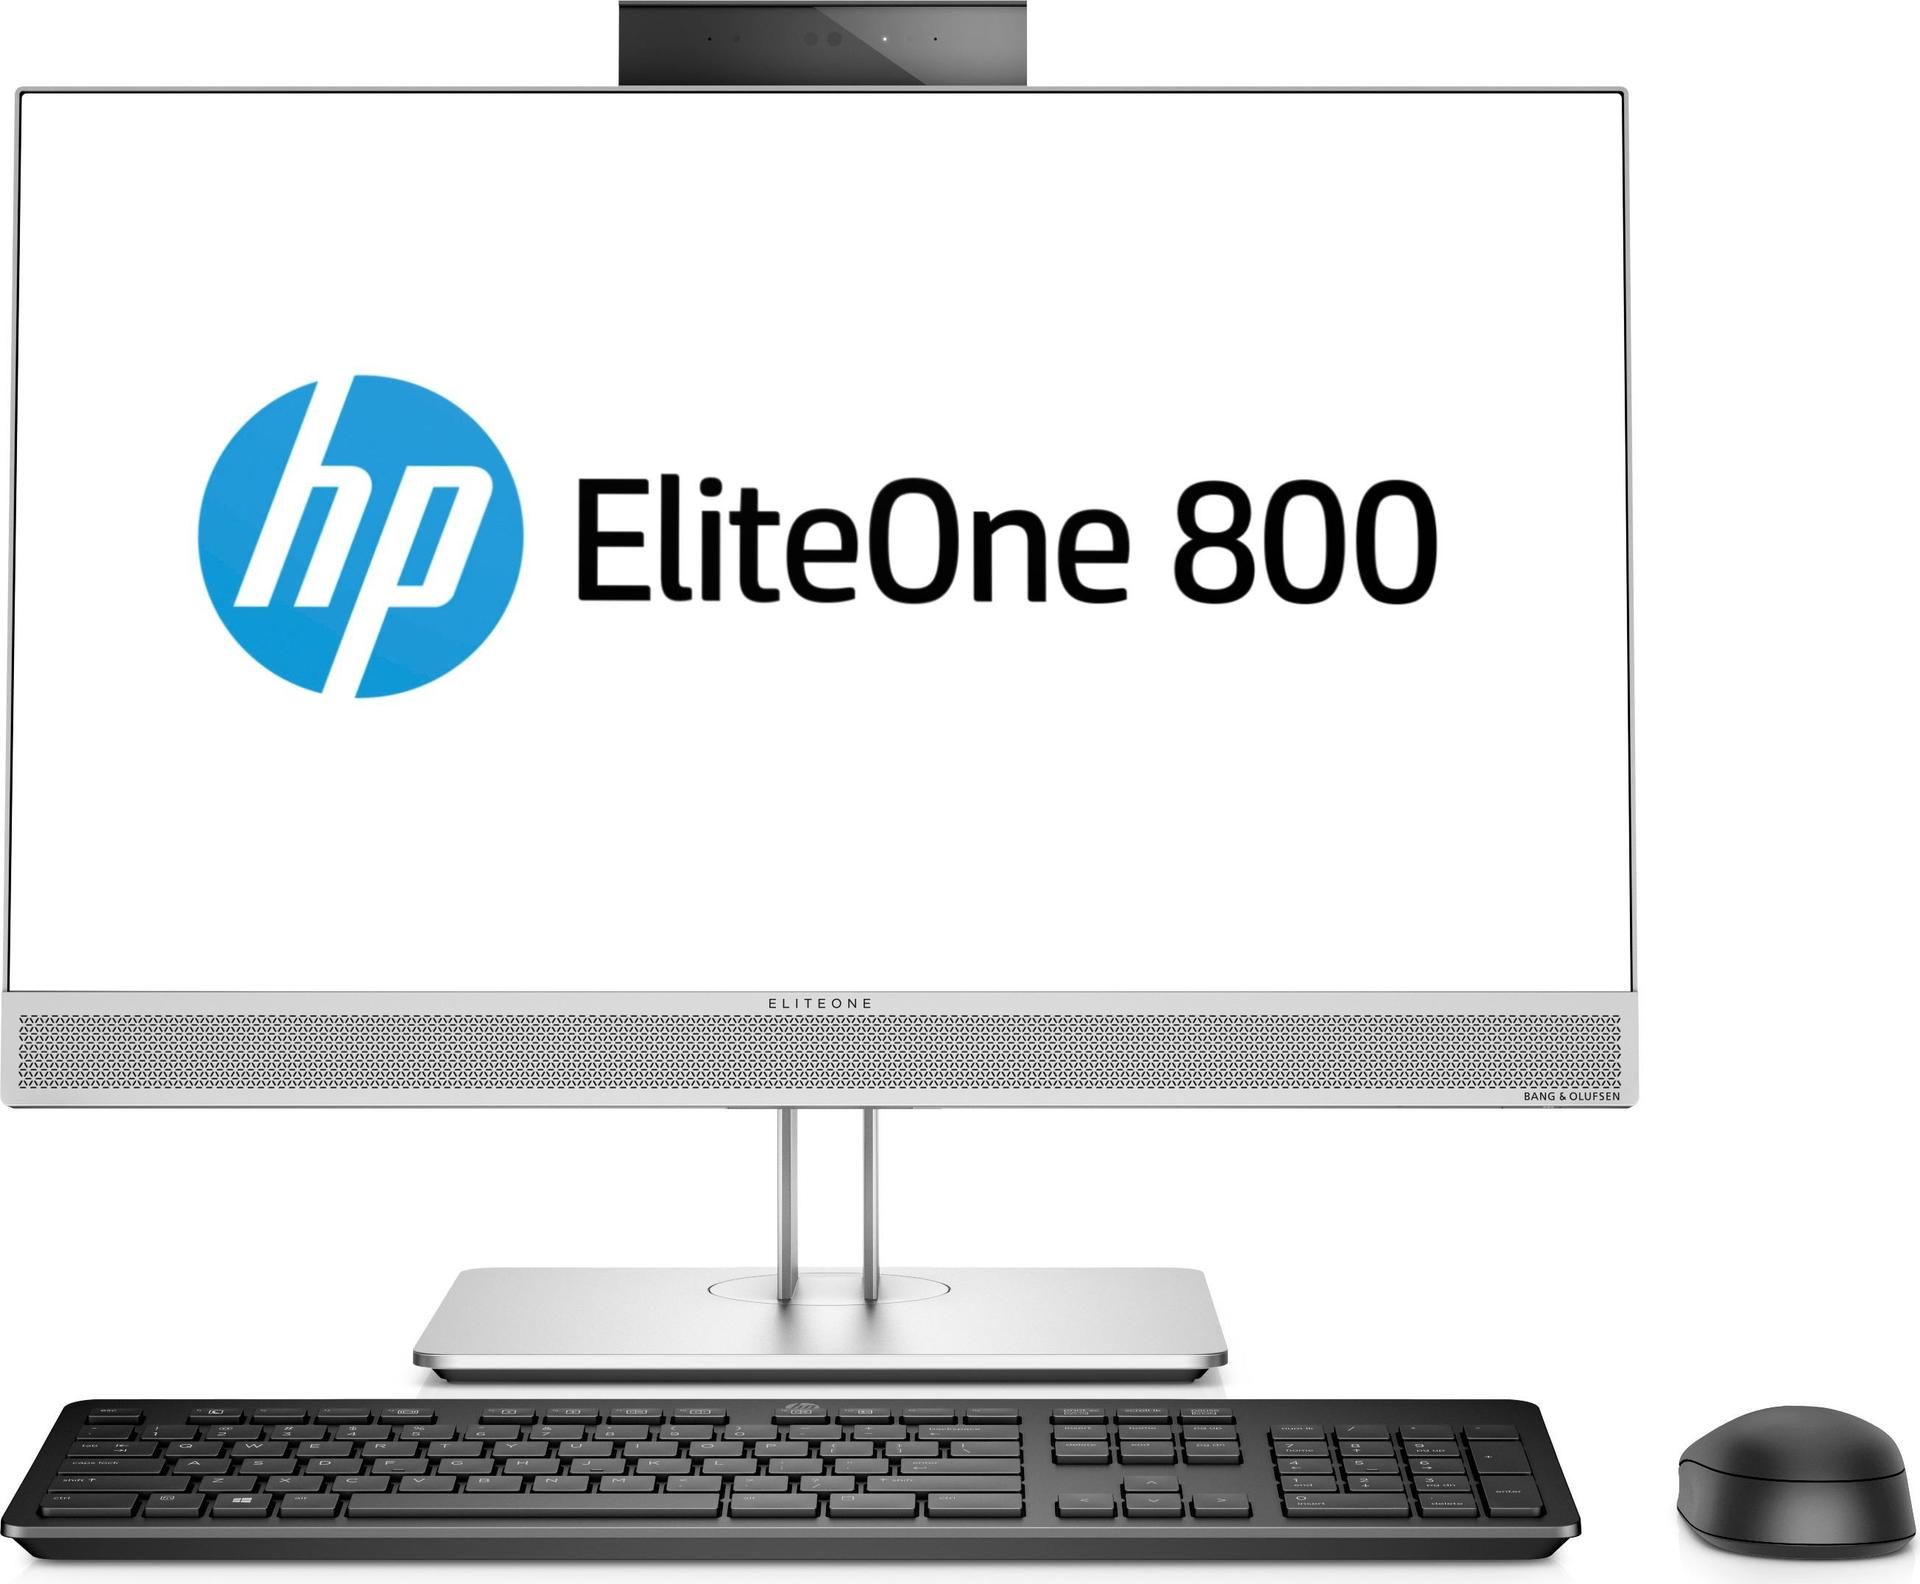 HP EliteOne 800 G4 - Healthcare - All-in-One (Komplettlösung) - 1 x Core i5 8500 / 3 GHz - RAM 16GB - SSD 512GB - NVMe - UHD Graphics 630 - GigE, Bluetooth 5,0 - WLAN: 802,11a/b/g/n/ac, Bluetooth 5,0 - Win 10 Pro 64-Bit - vPro - Monitor: LED 60,45 cm (23.